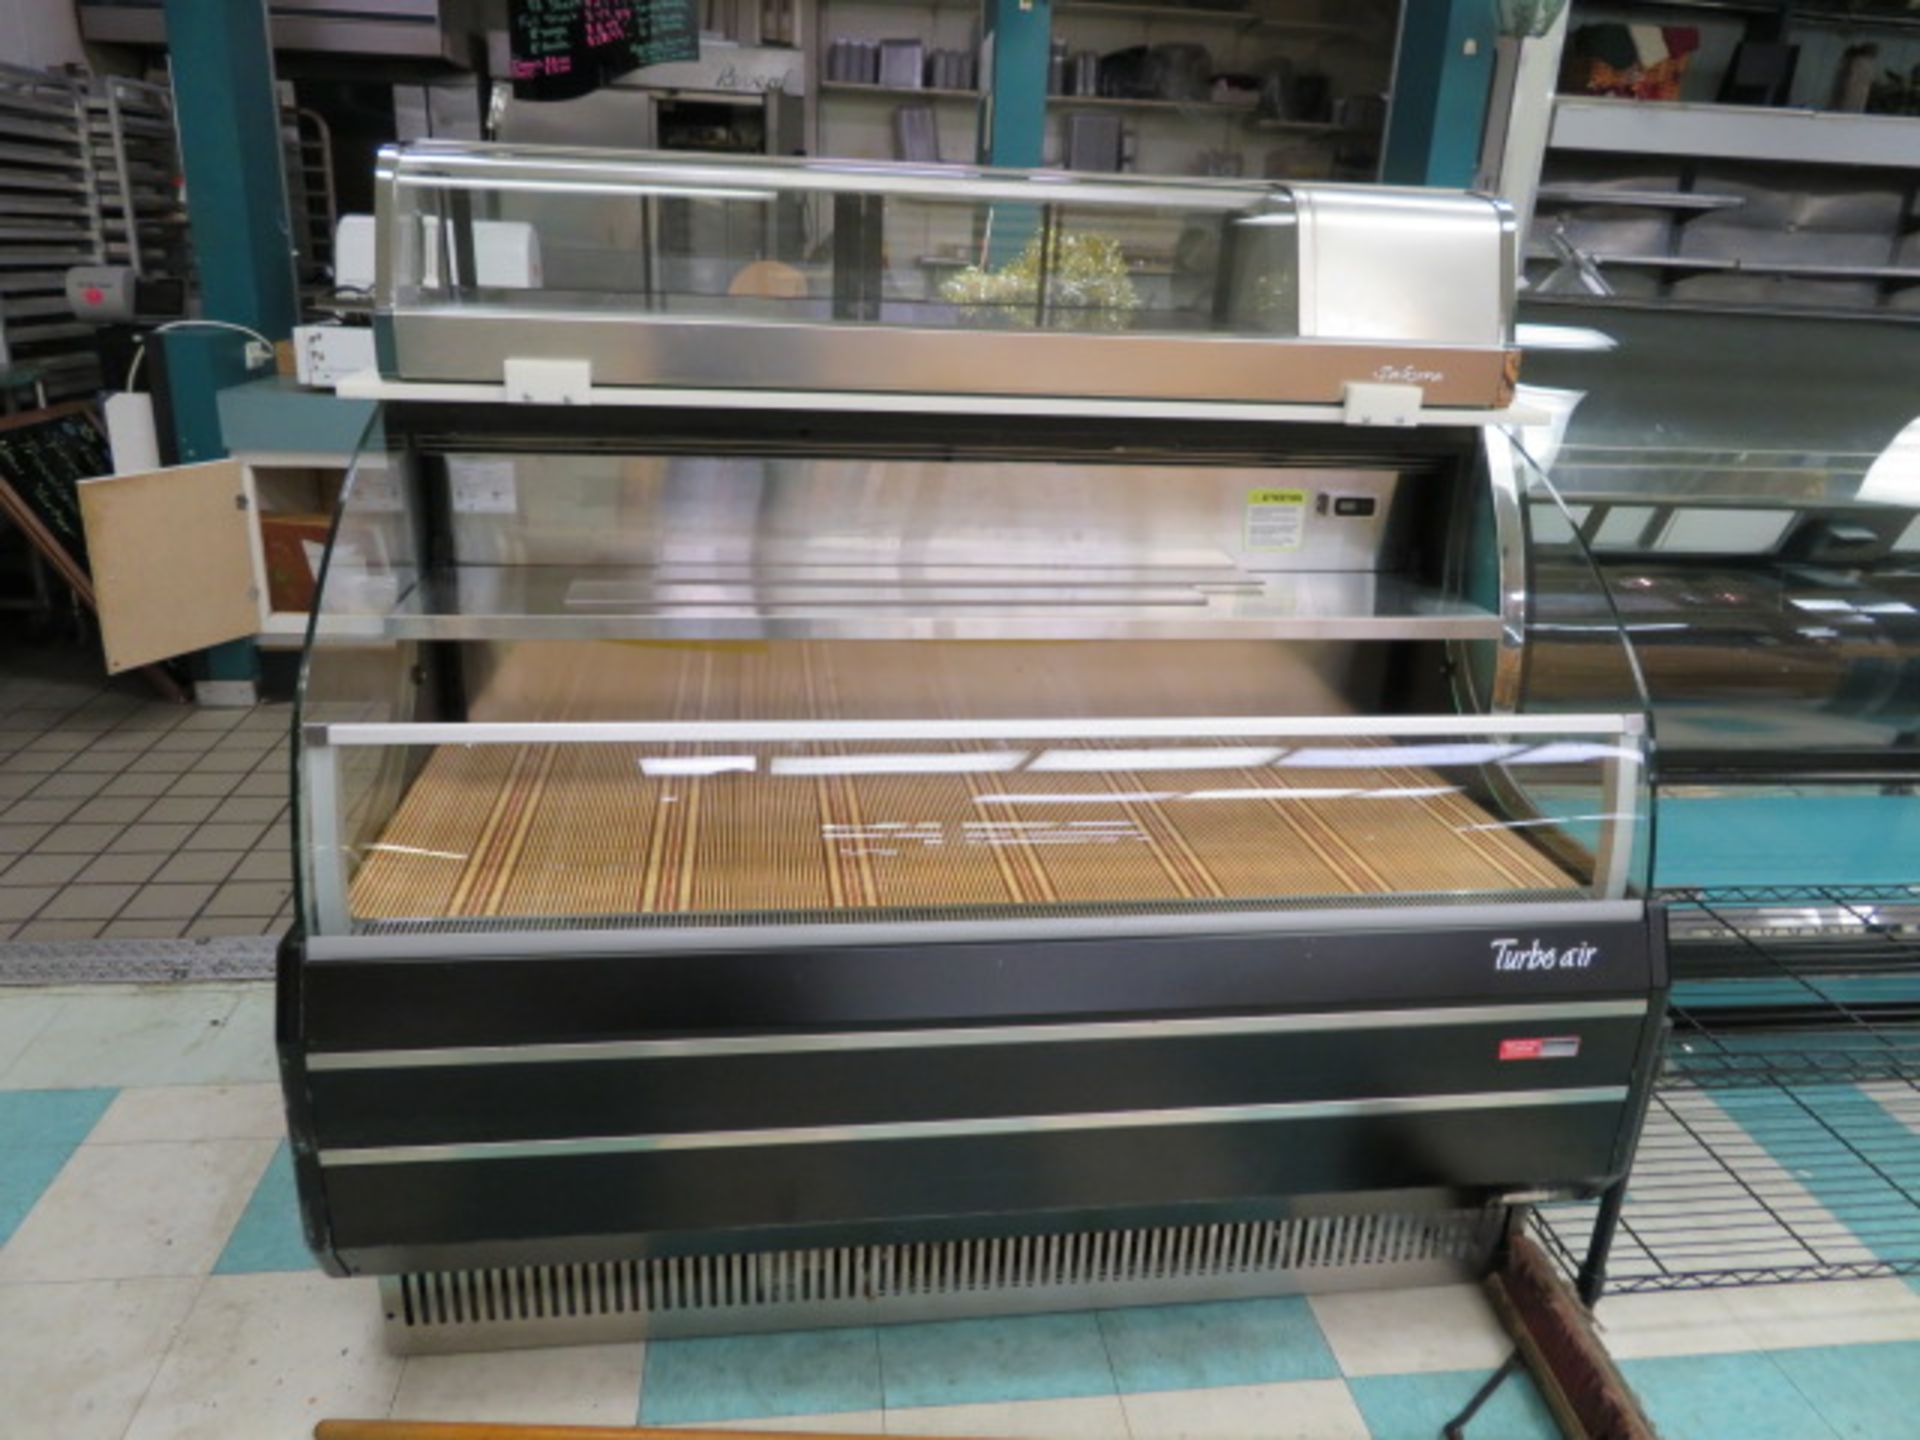 TURBO AIR SINGLE DECK OPEN S/C SELF-SERVE DISPLAY CASE, MDL. TOM-60LB (Located - Phila., PA) - Image 3 of 3